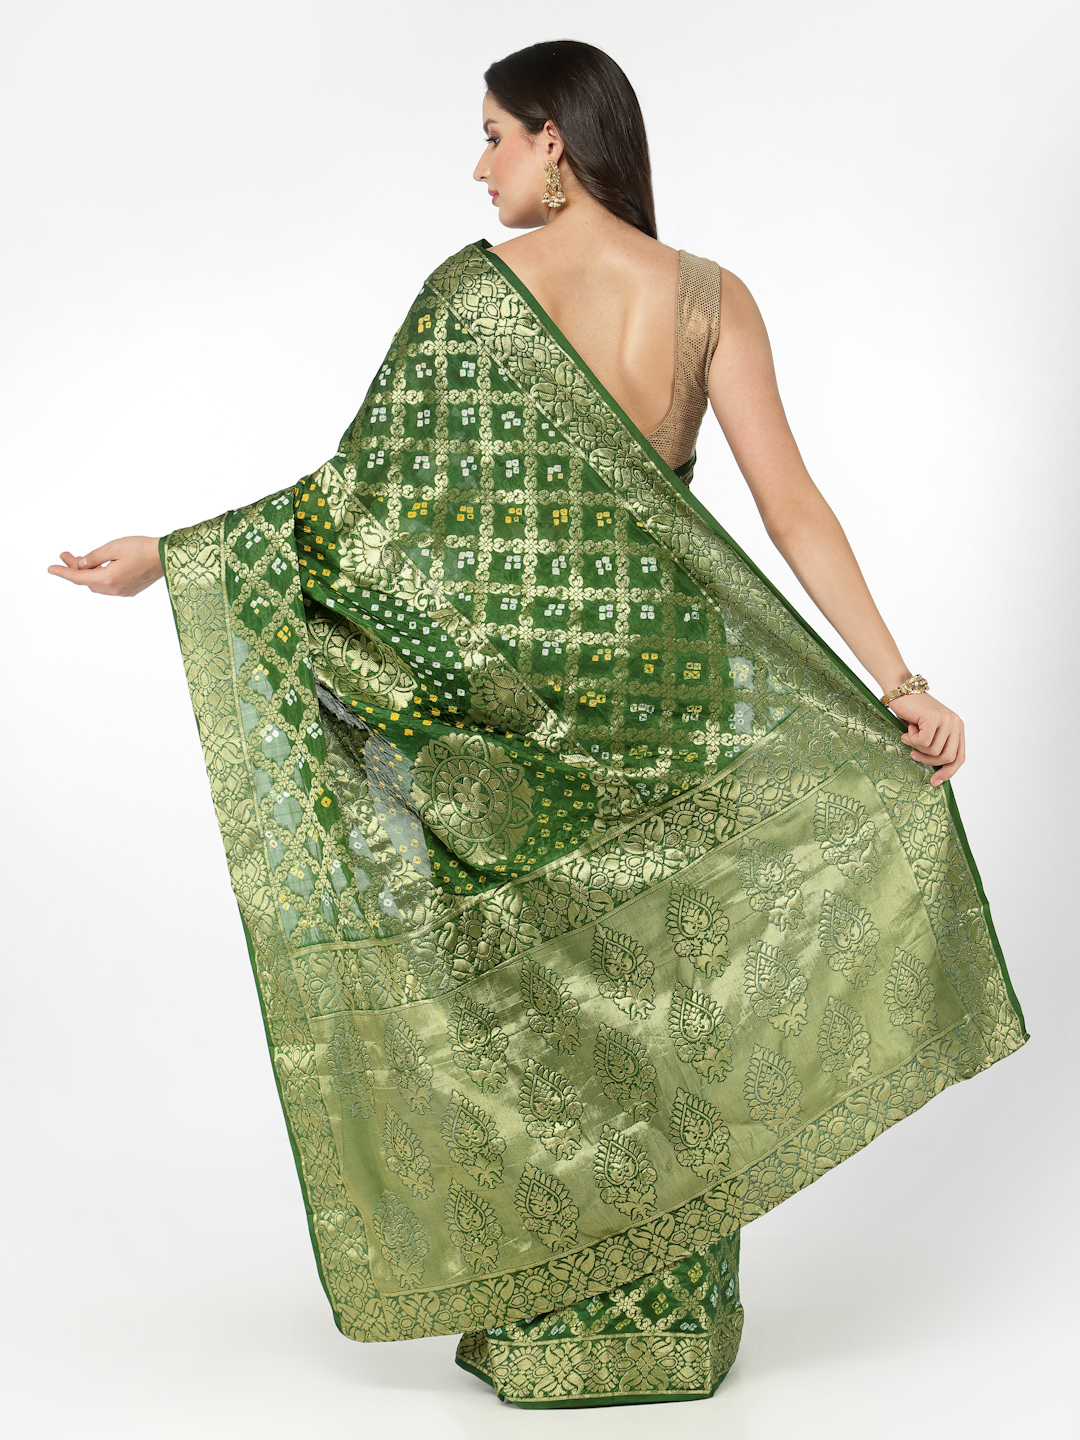 Women Silk Bandhani and Zari Weaving Saree with Unstitched Blouse - Green